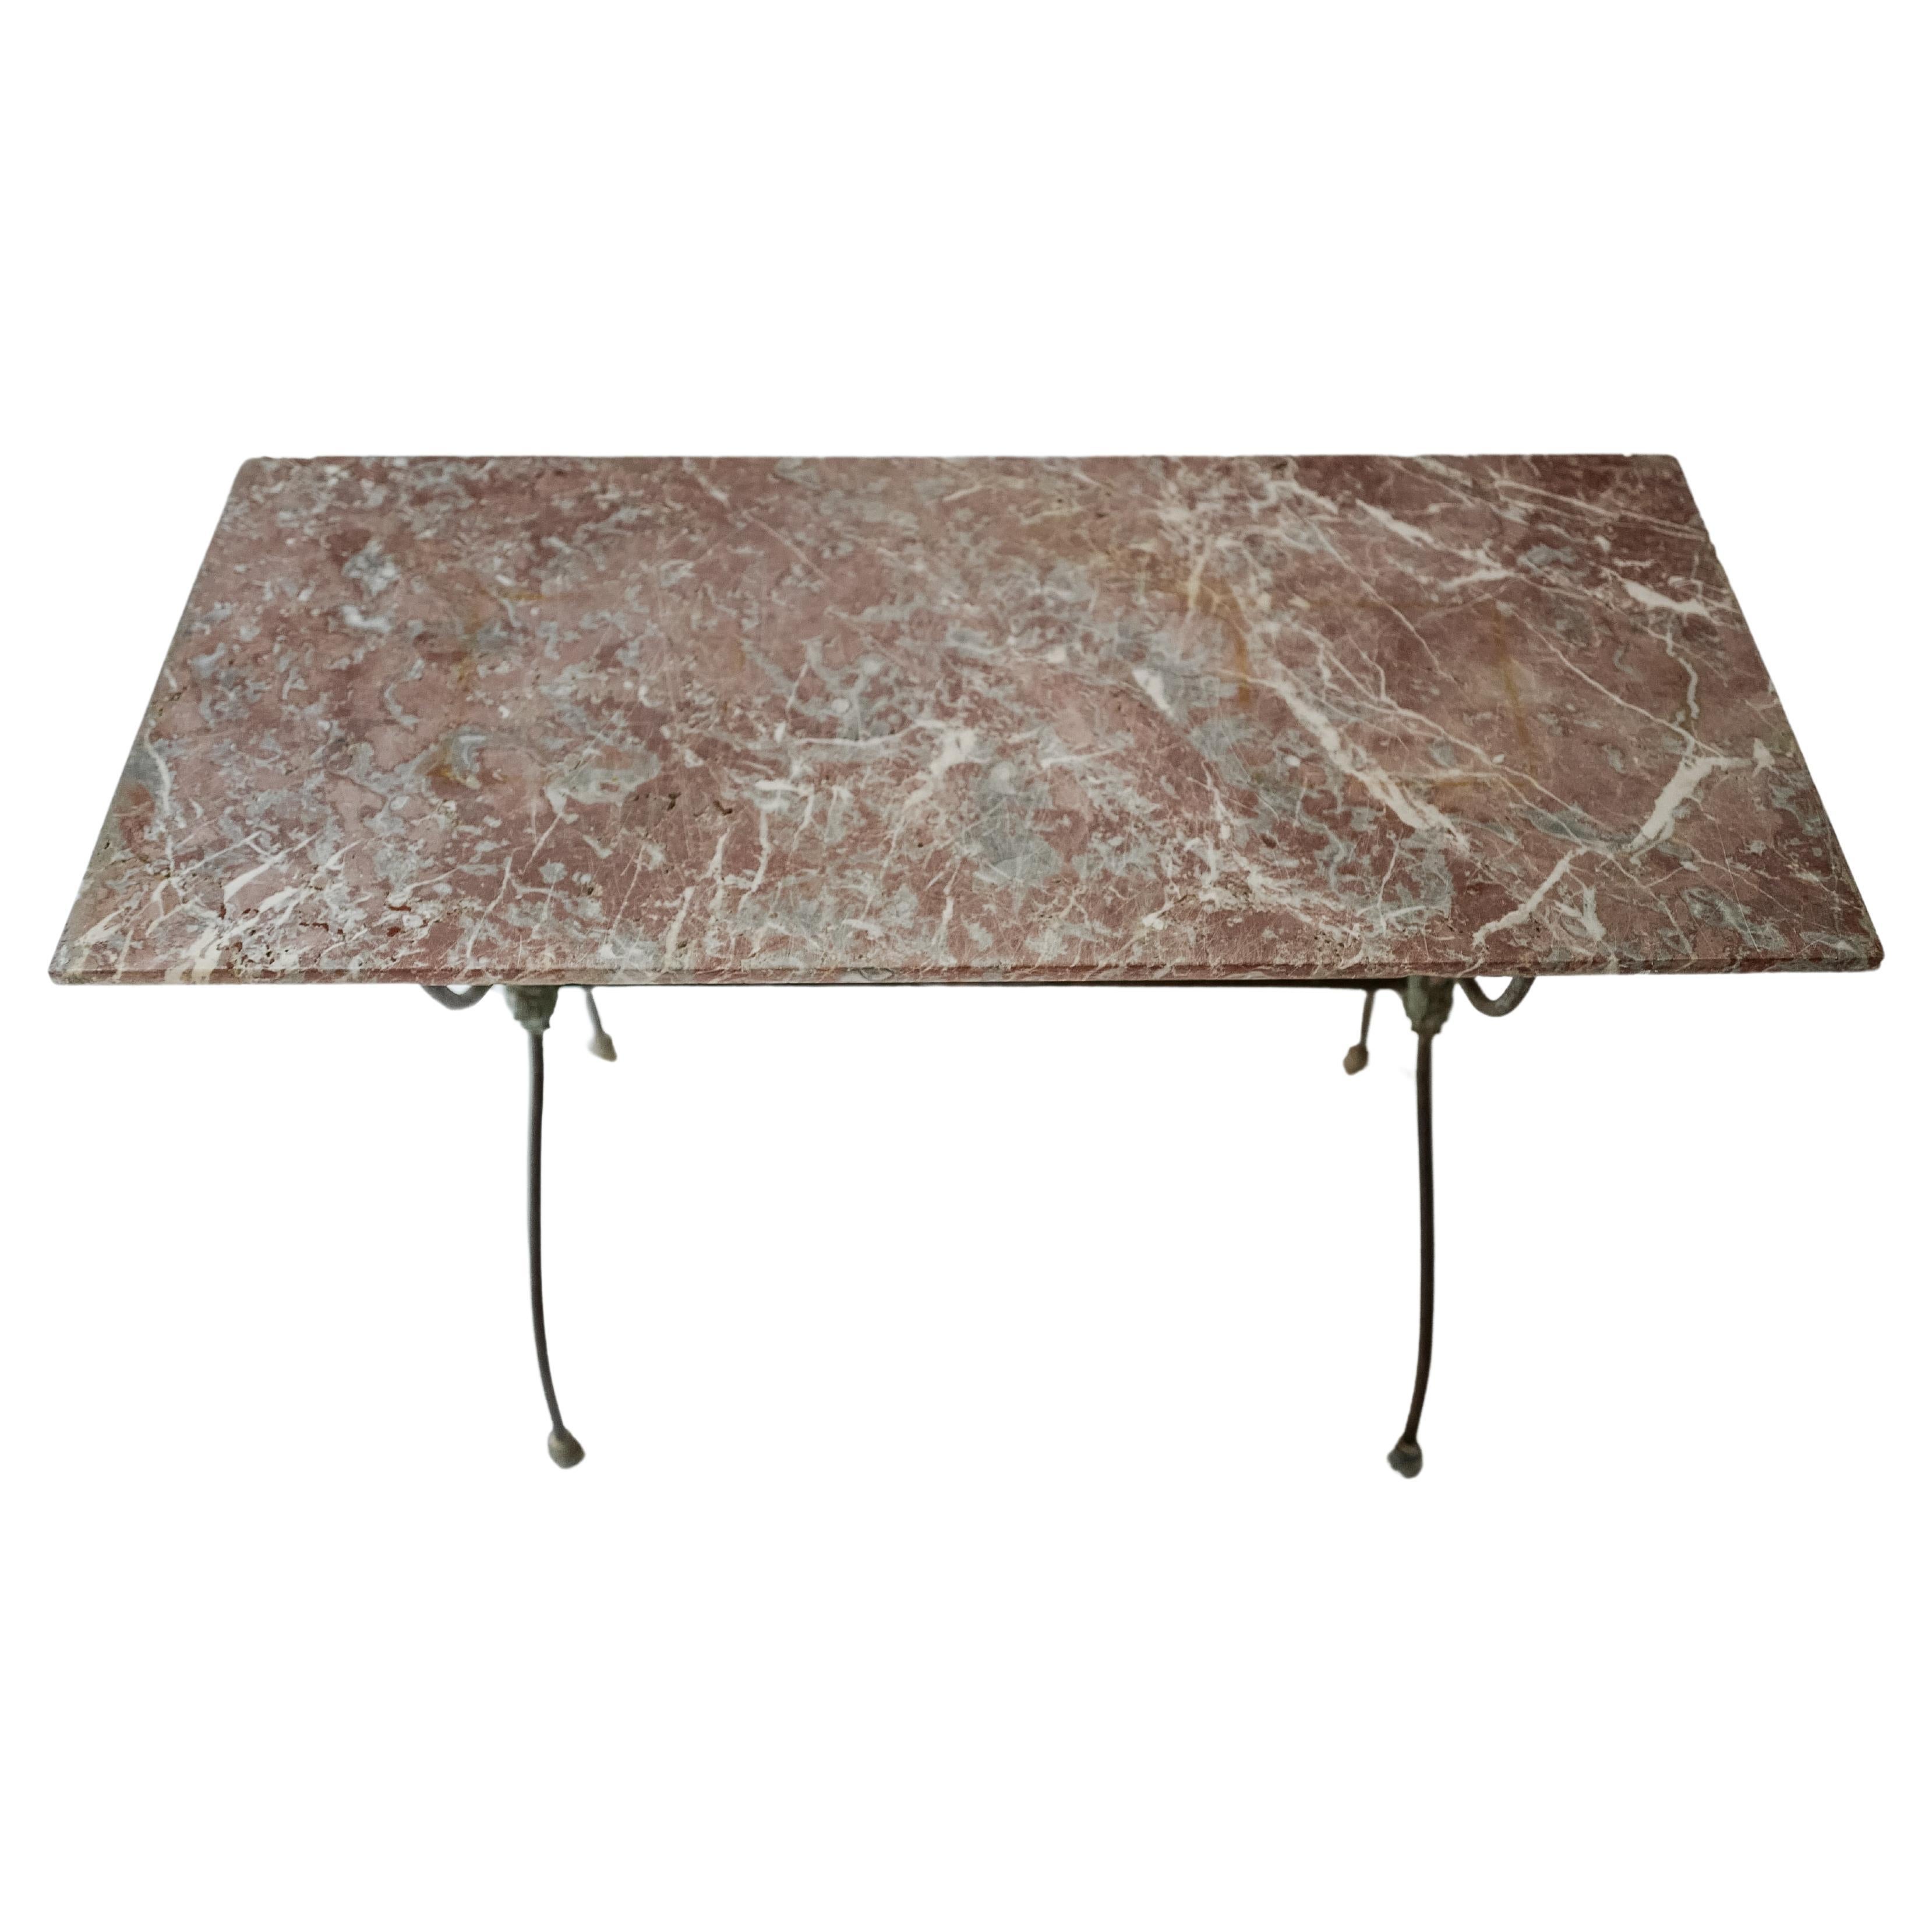 A stunning pink French marble and iron bistro garden table circa 19th Century. Top is separate from base. 